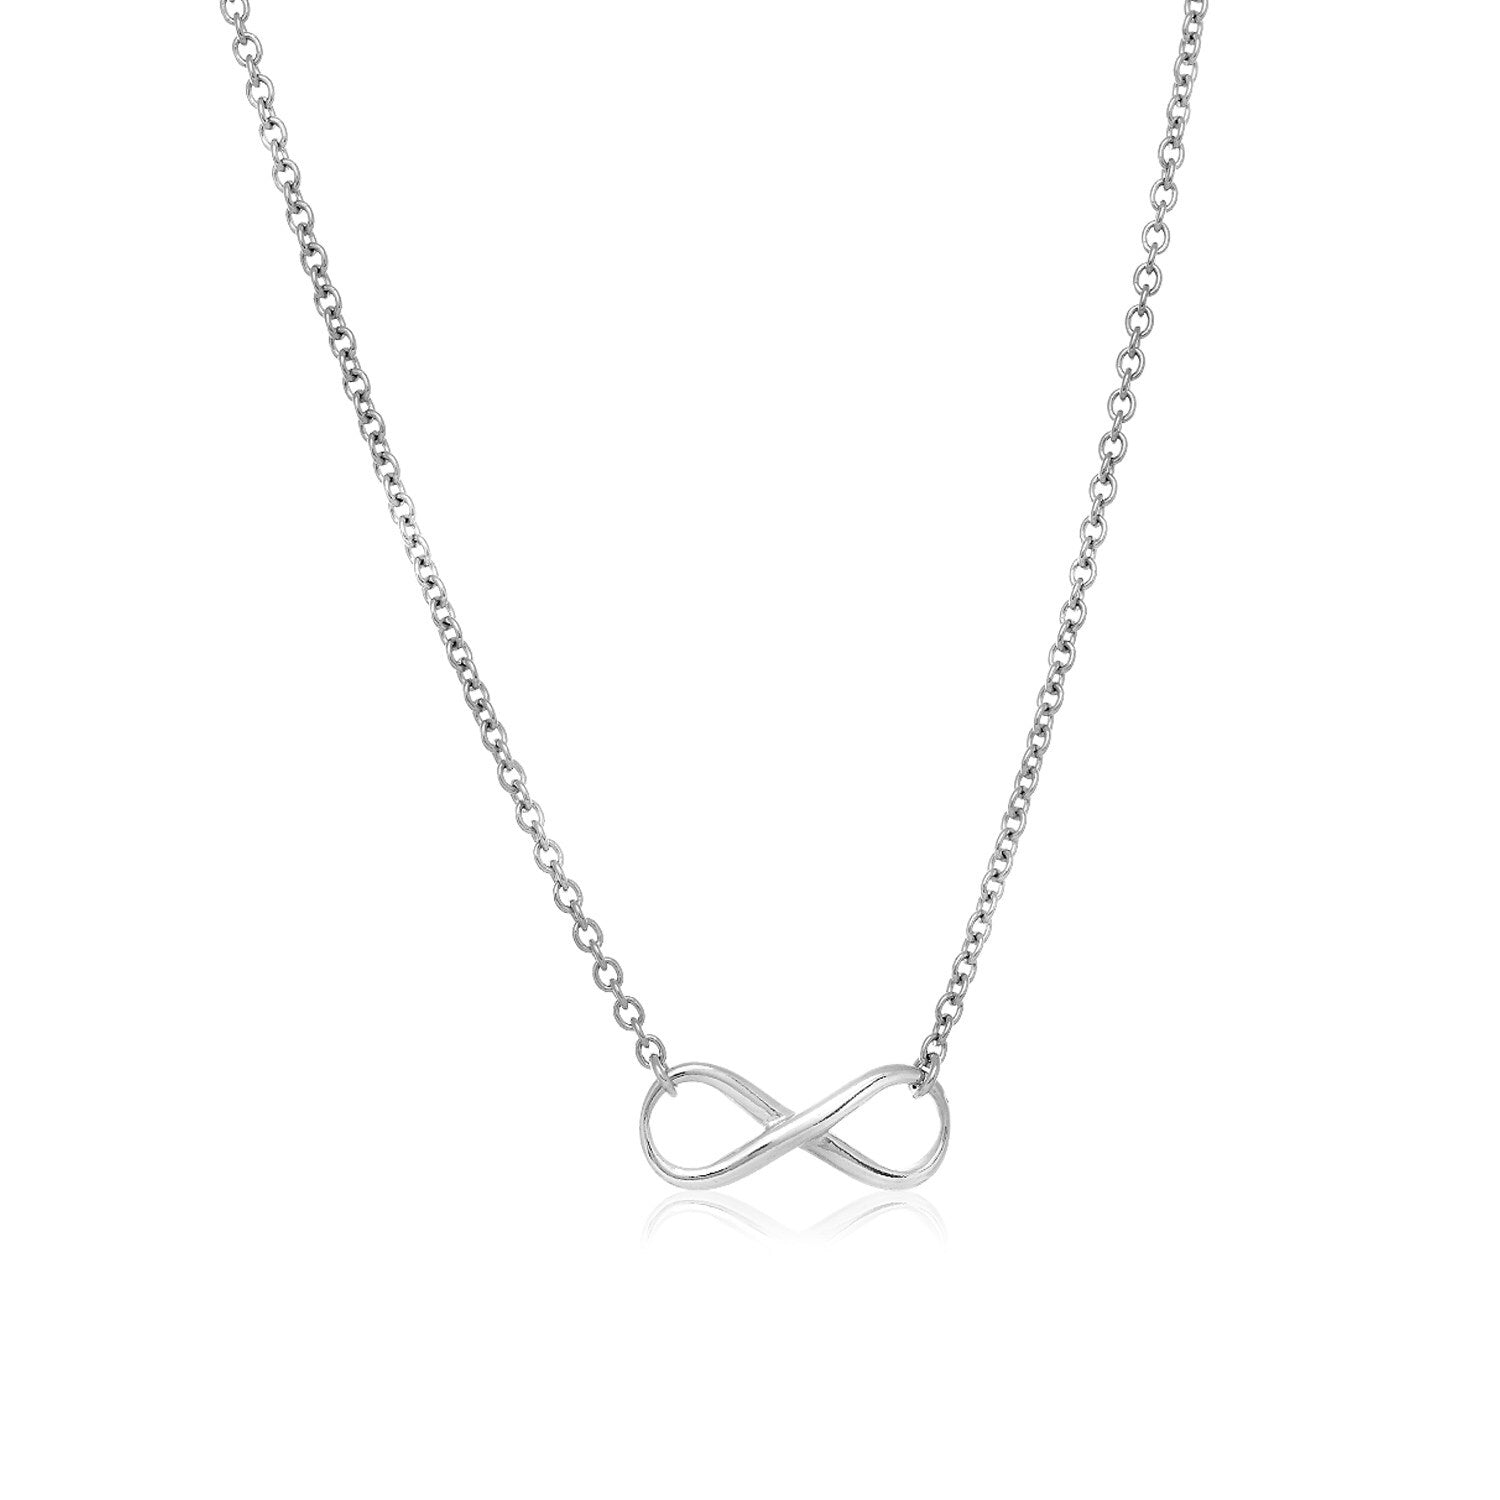 Sterling Silver Infinity Symbol Necklace, size 18''